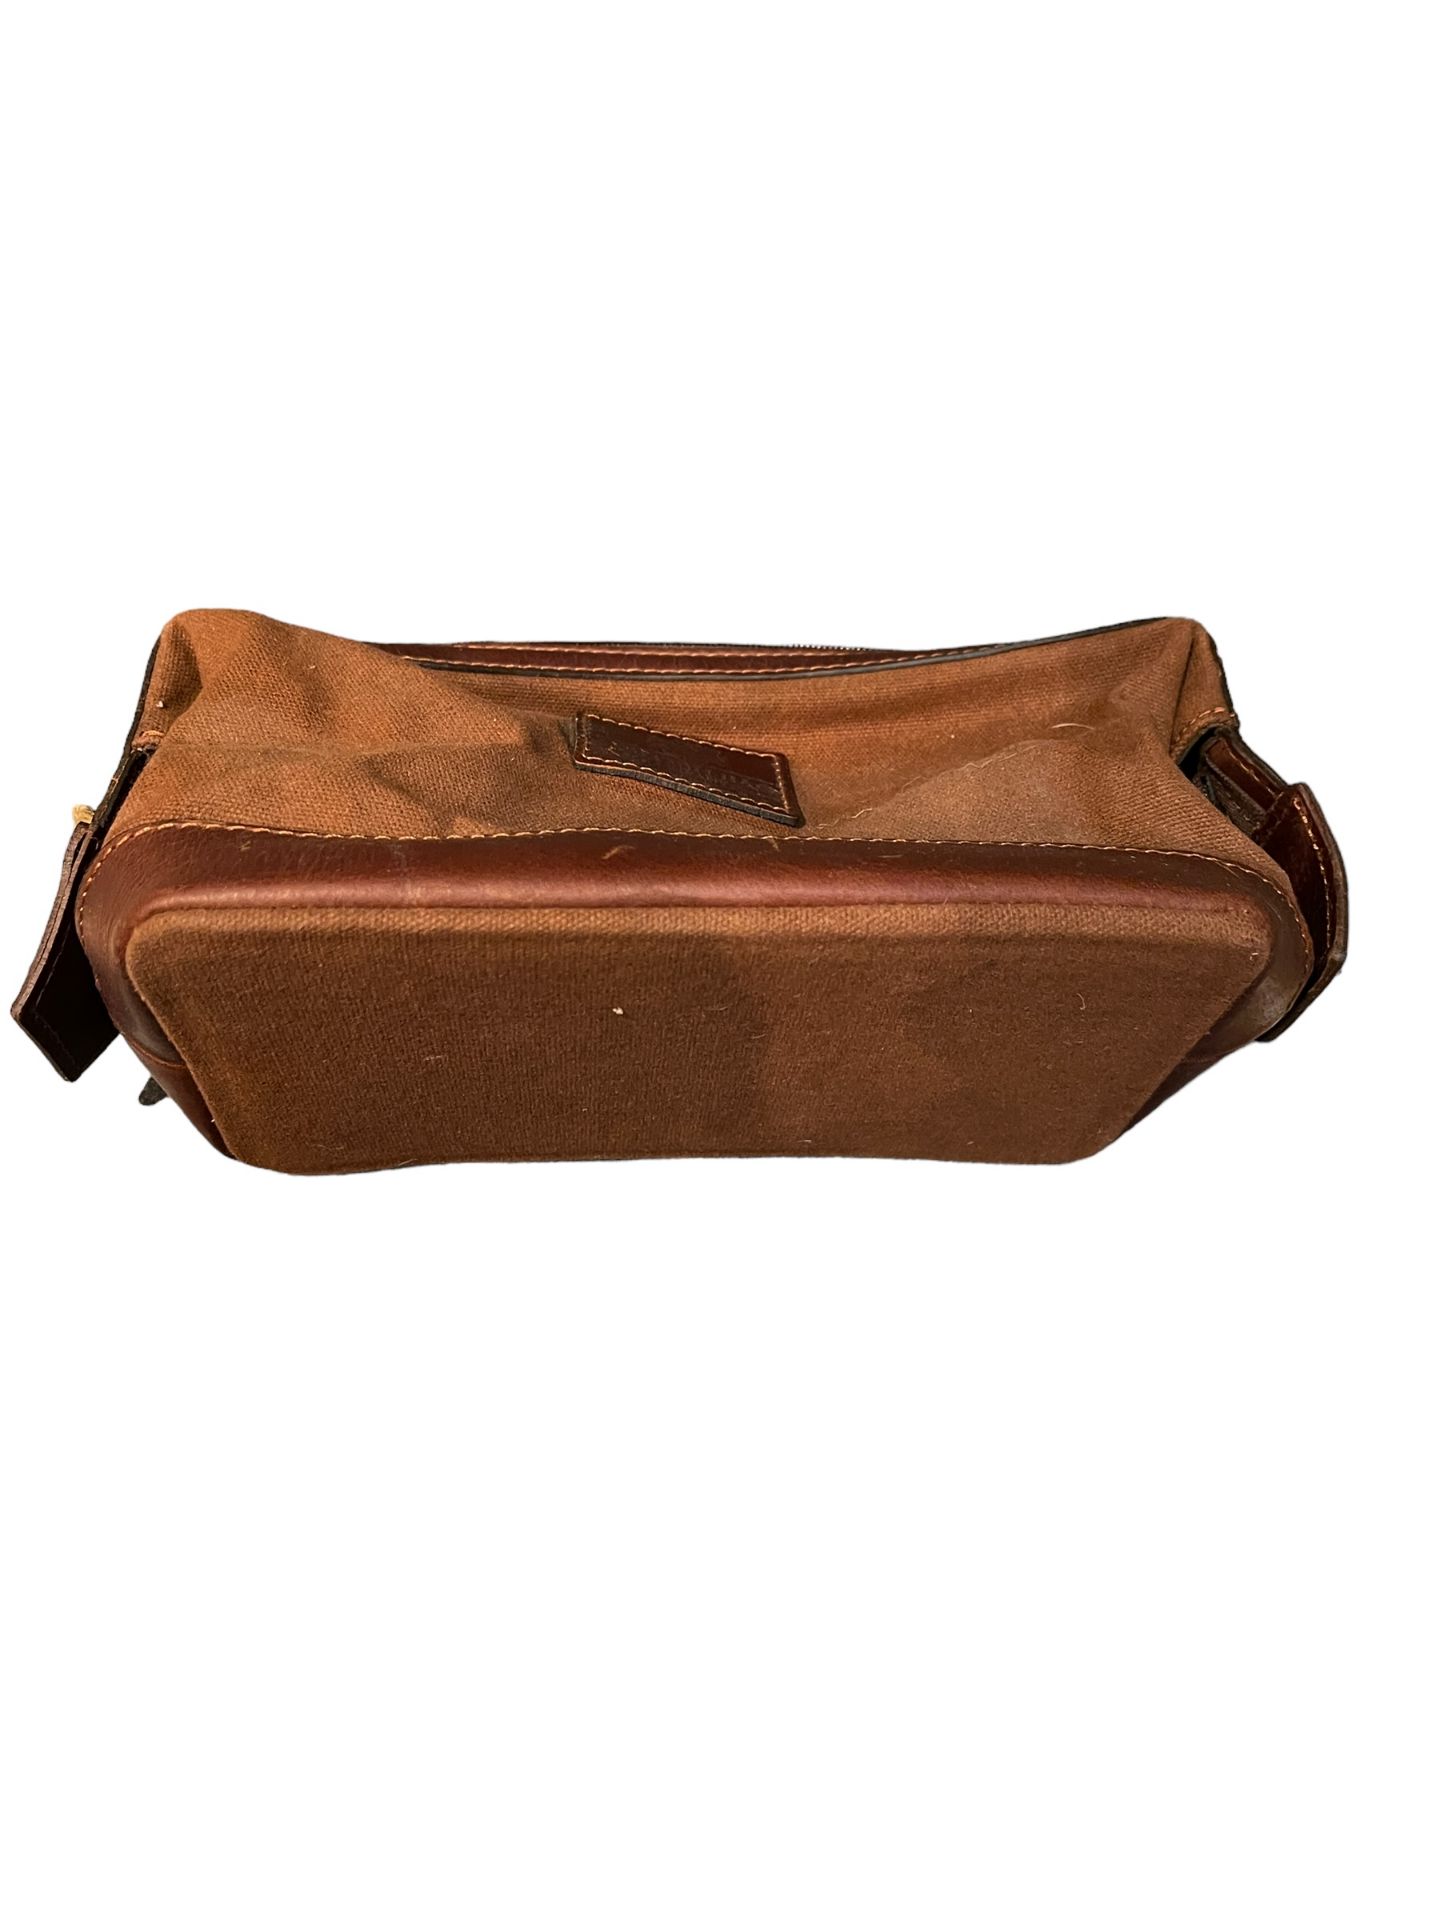 British wash men's toilet bag new x stock from a private jet charter. - Image 3 of 8